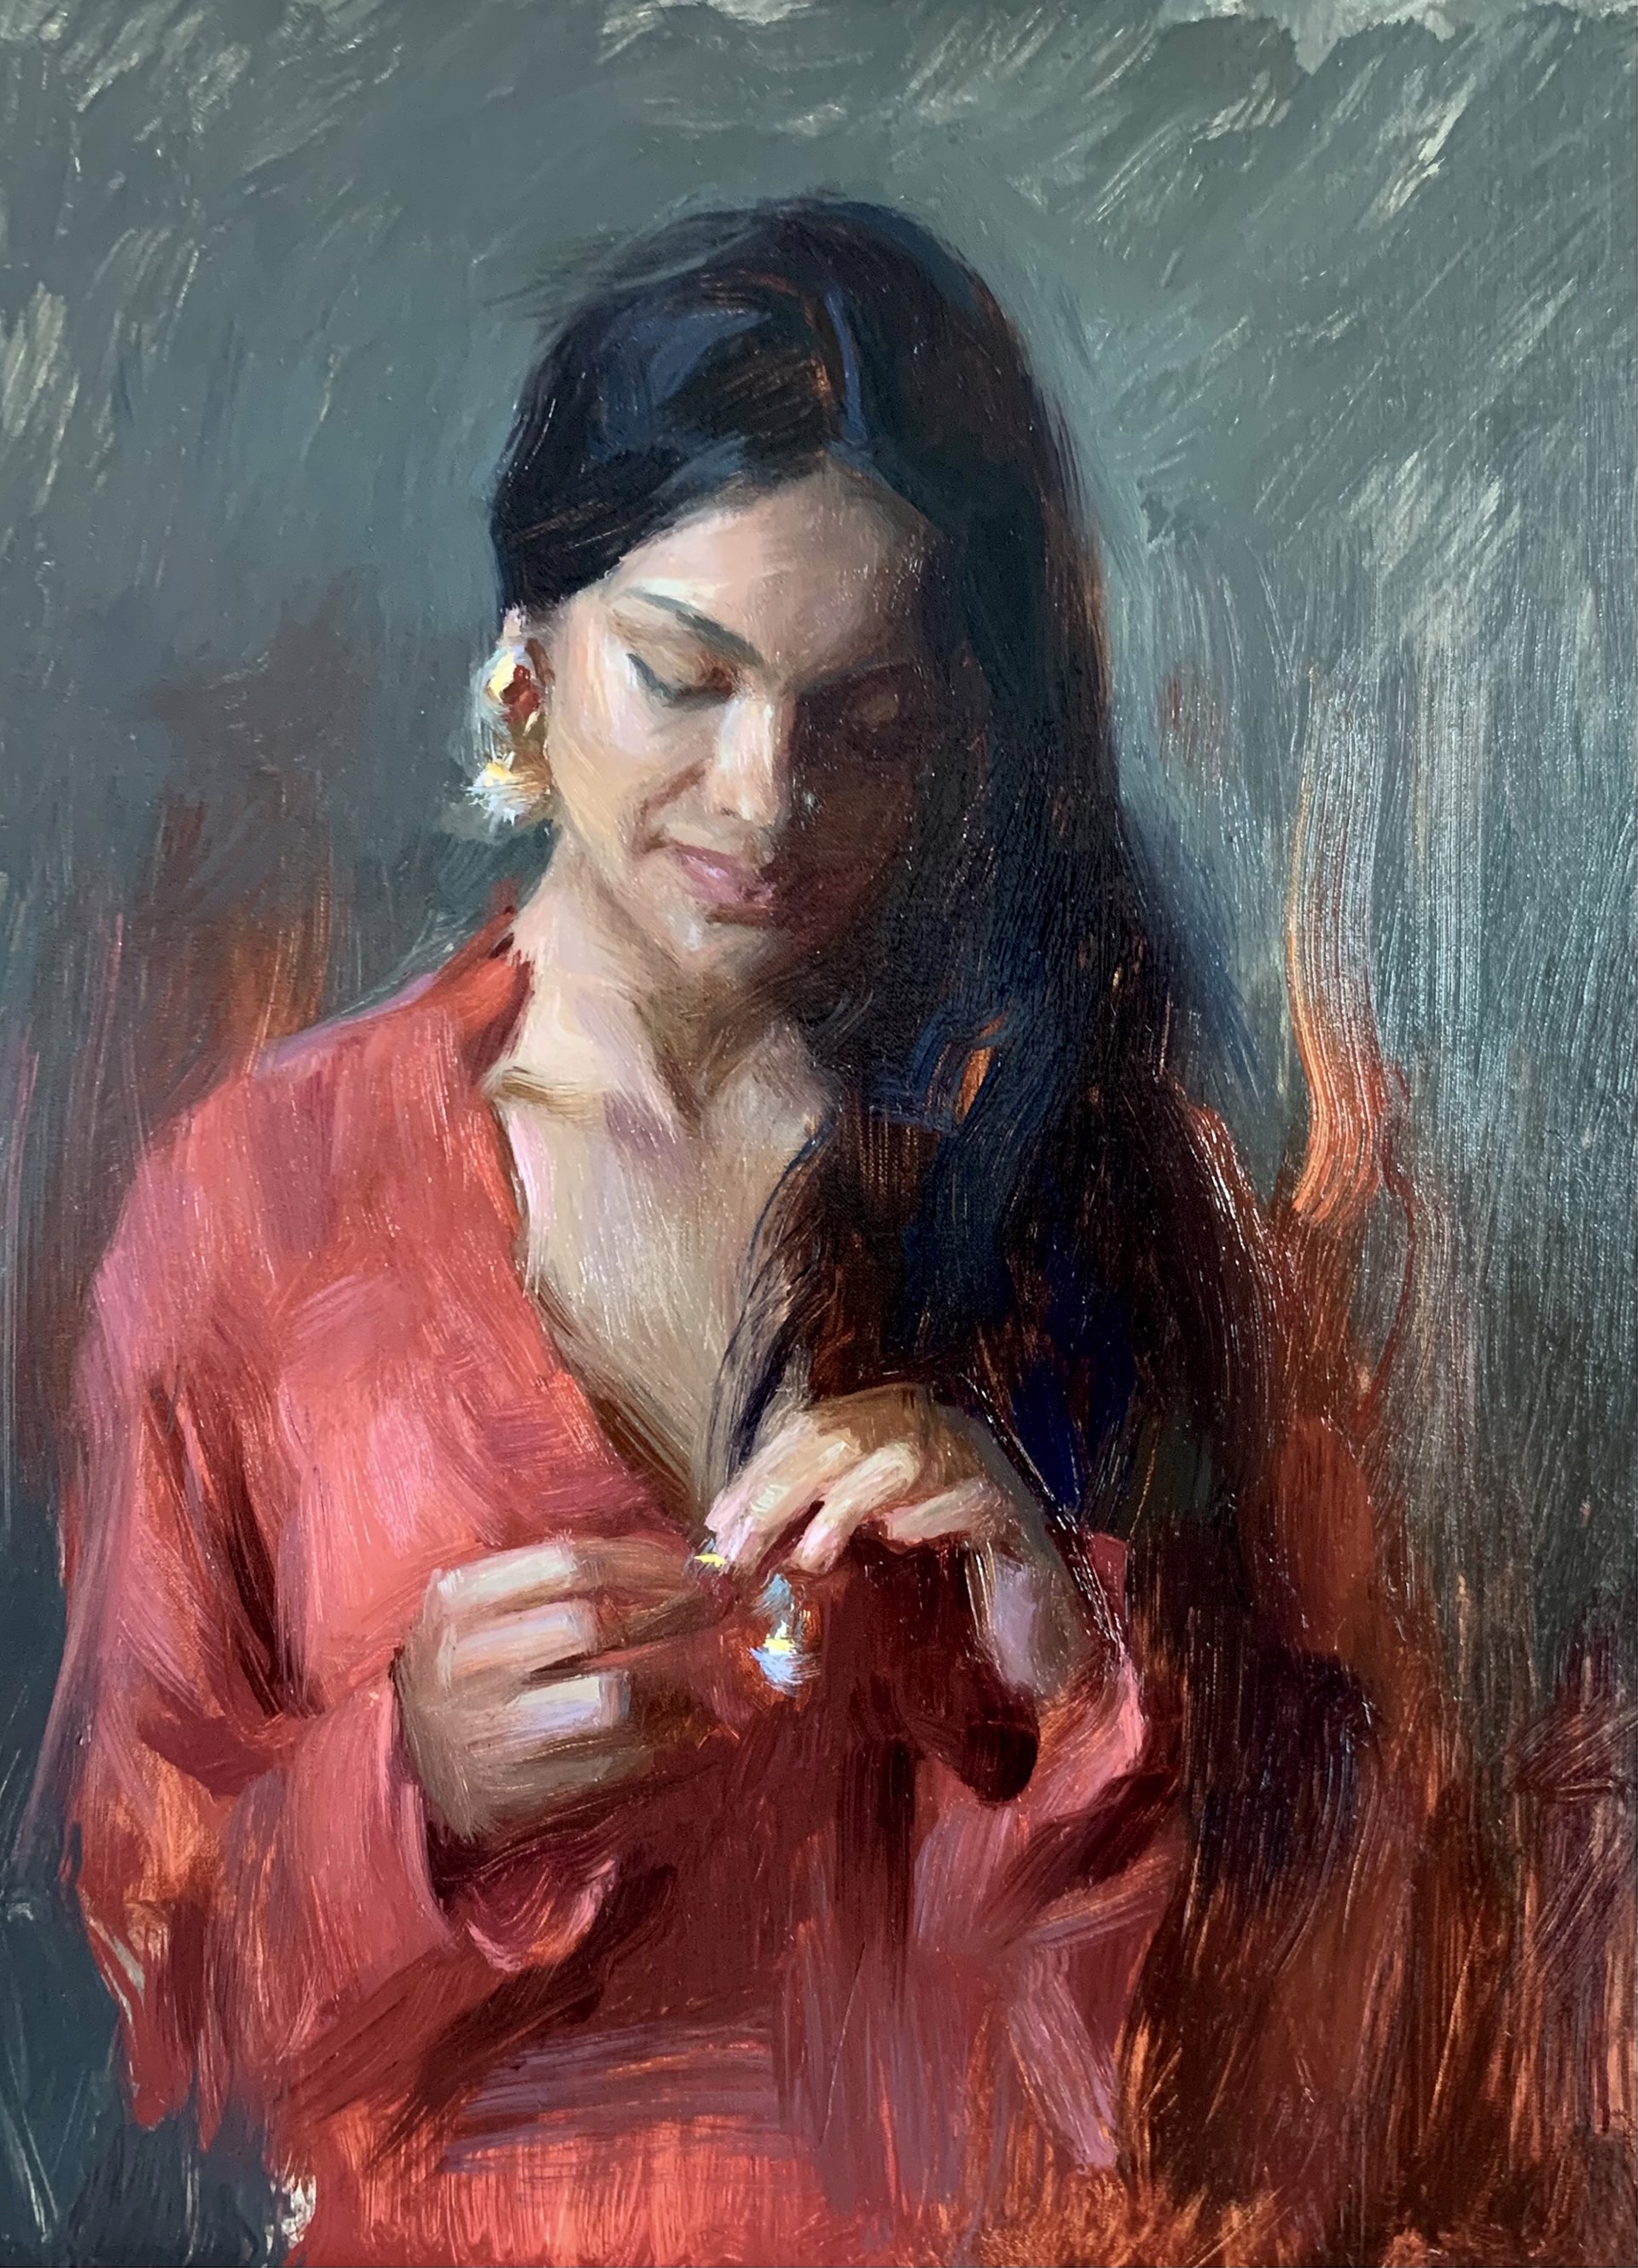 Contemplation in Red by Suchitra Bhosle